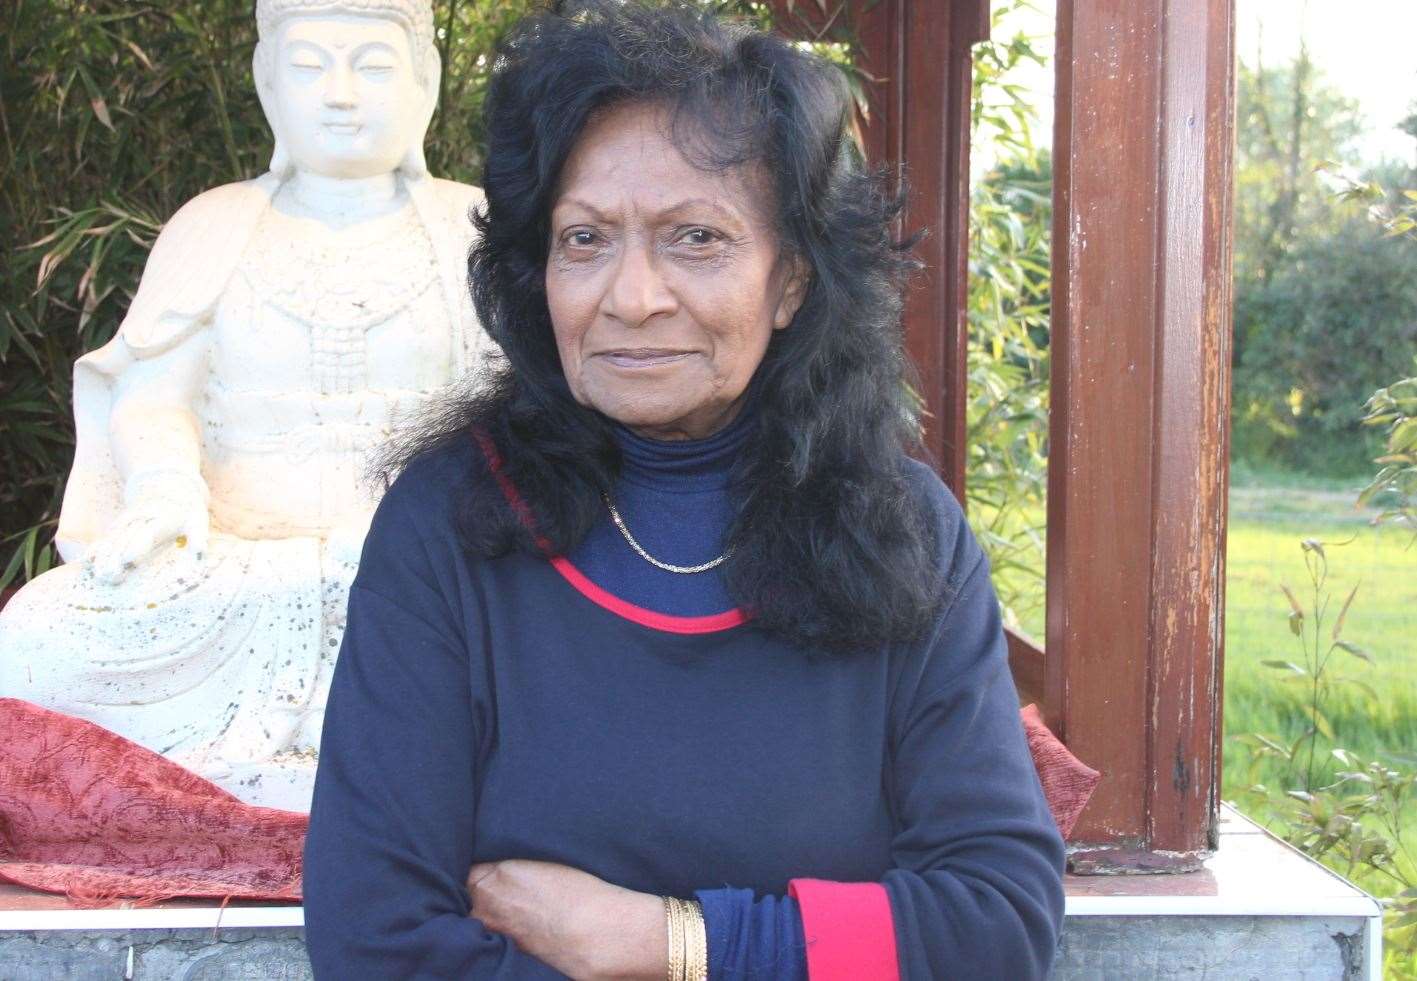 Sheppey east councillor Padmini Nissanga says Covid-19 is treated as a 'joke'